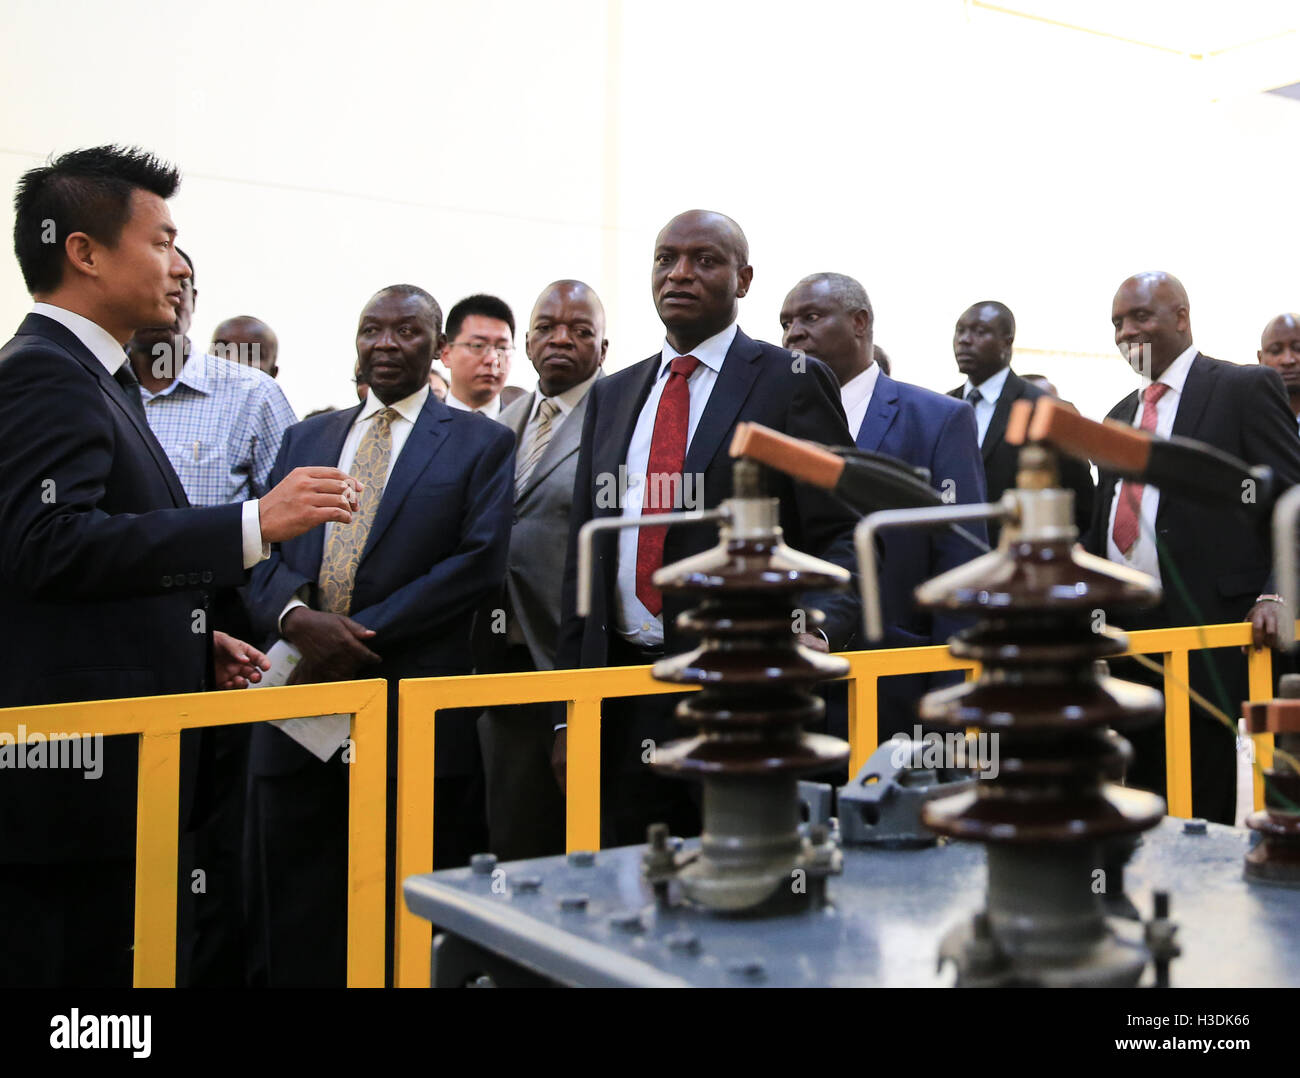 Nairobi, Kenya. 5th Oct, 2016. Charles Keter (C), Kenya's Cabinet Secretary for Energy and Petroleum, visits Yocean manufacturing transformers factory on the outskirts of Nairobi, Kenya, on Oct. 5, 2016. Kenya's first transfomer-manufacturing plant, set up by Chinese company Yocean Group, opened on Wednesday. Kenya has been relying on transformers from abroad, mostly from India. Kenya's Cabinet Secretary for Energy and Petroleum, Charles Keter, said the plant will ease procurement of transformers and other electrical appliances. © Pan Siwei/Xinhua/Alamy Live News Stock Photo